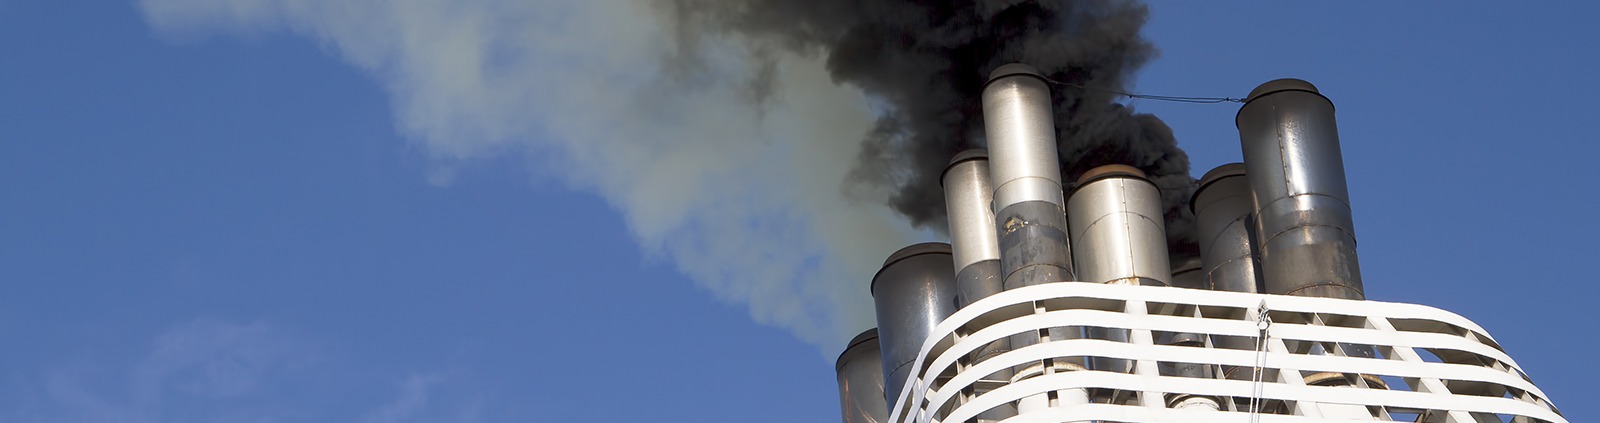 analyzing exhaust gases from the ship's pipes